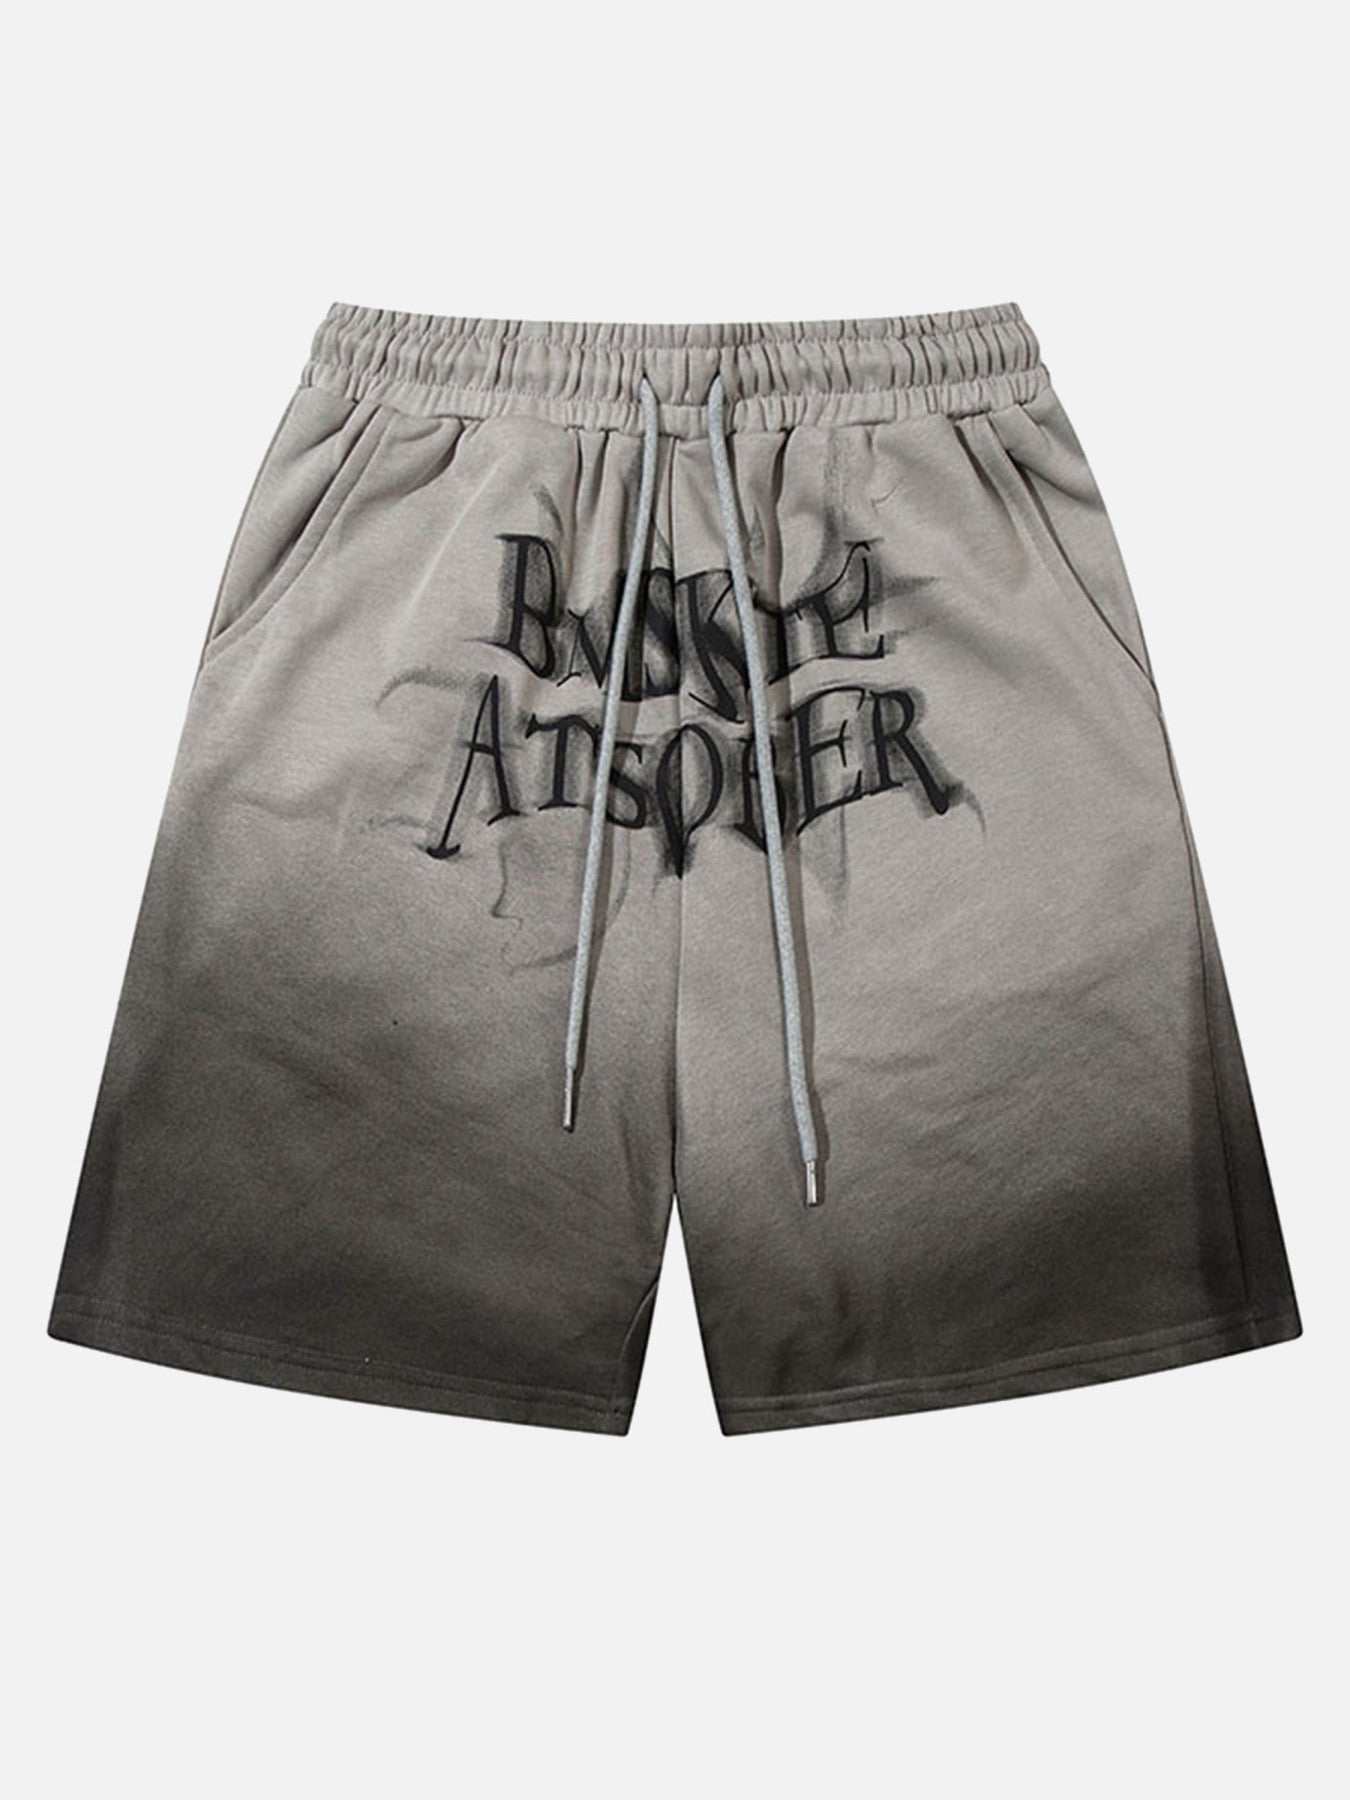 The Supermade American Vintage Drawstring Sports Shorts